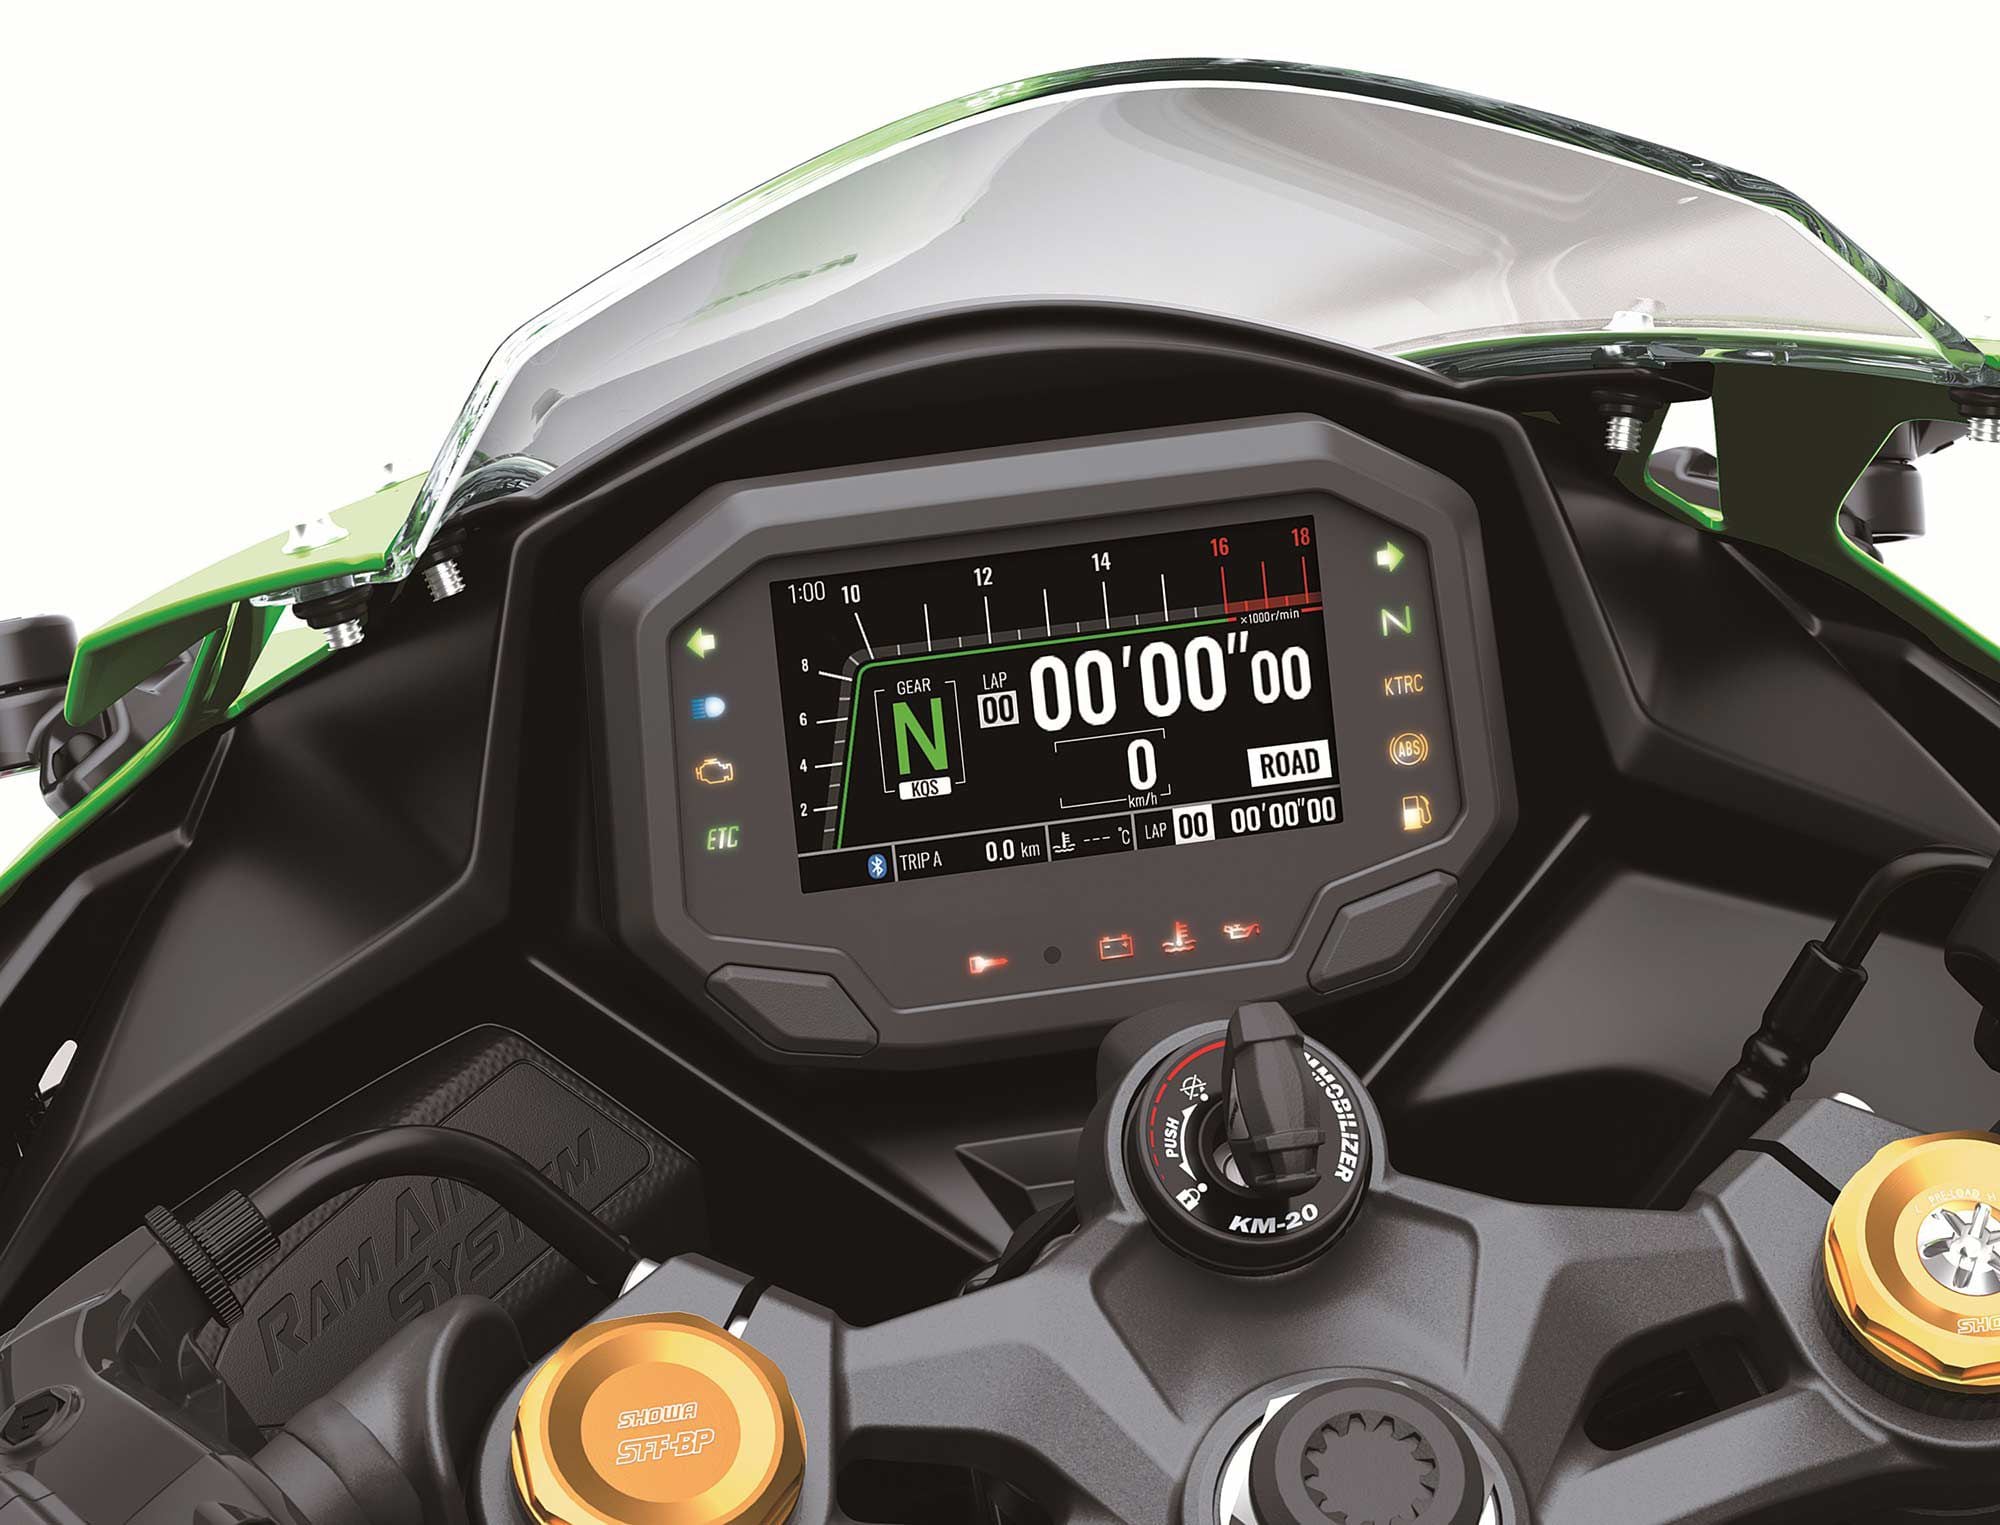 Circuit mode provides only the info needed for track riding.